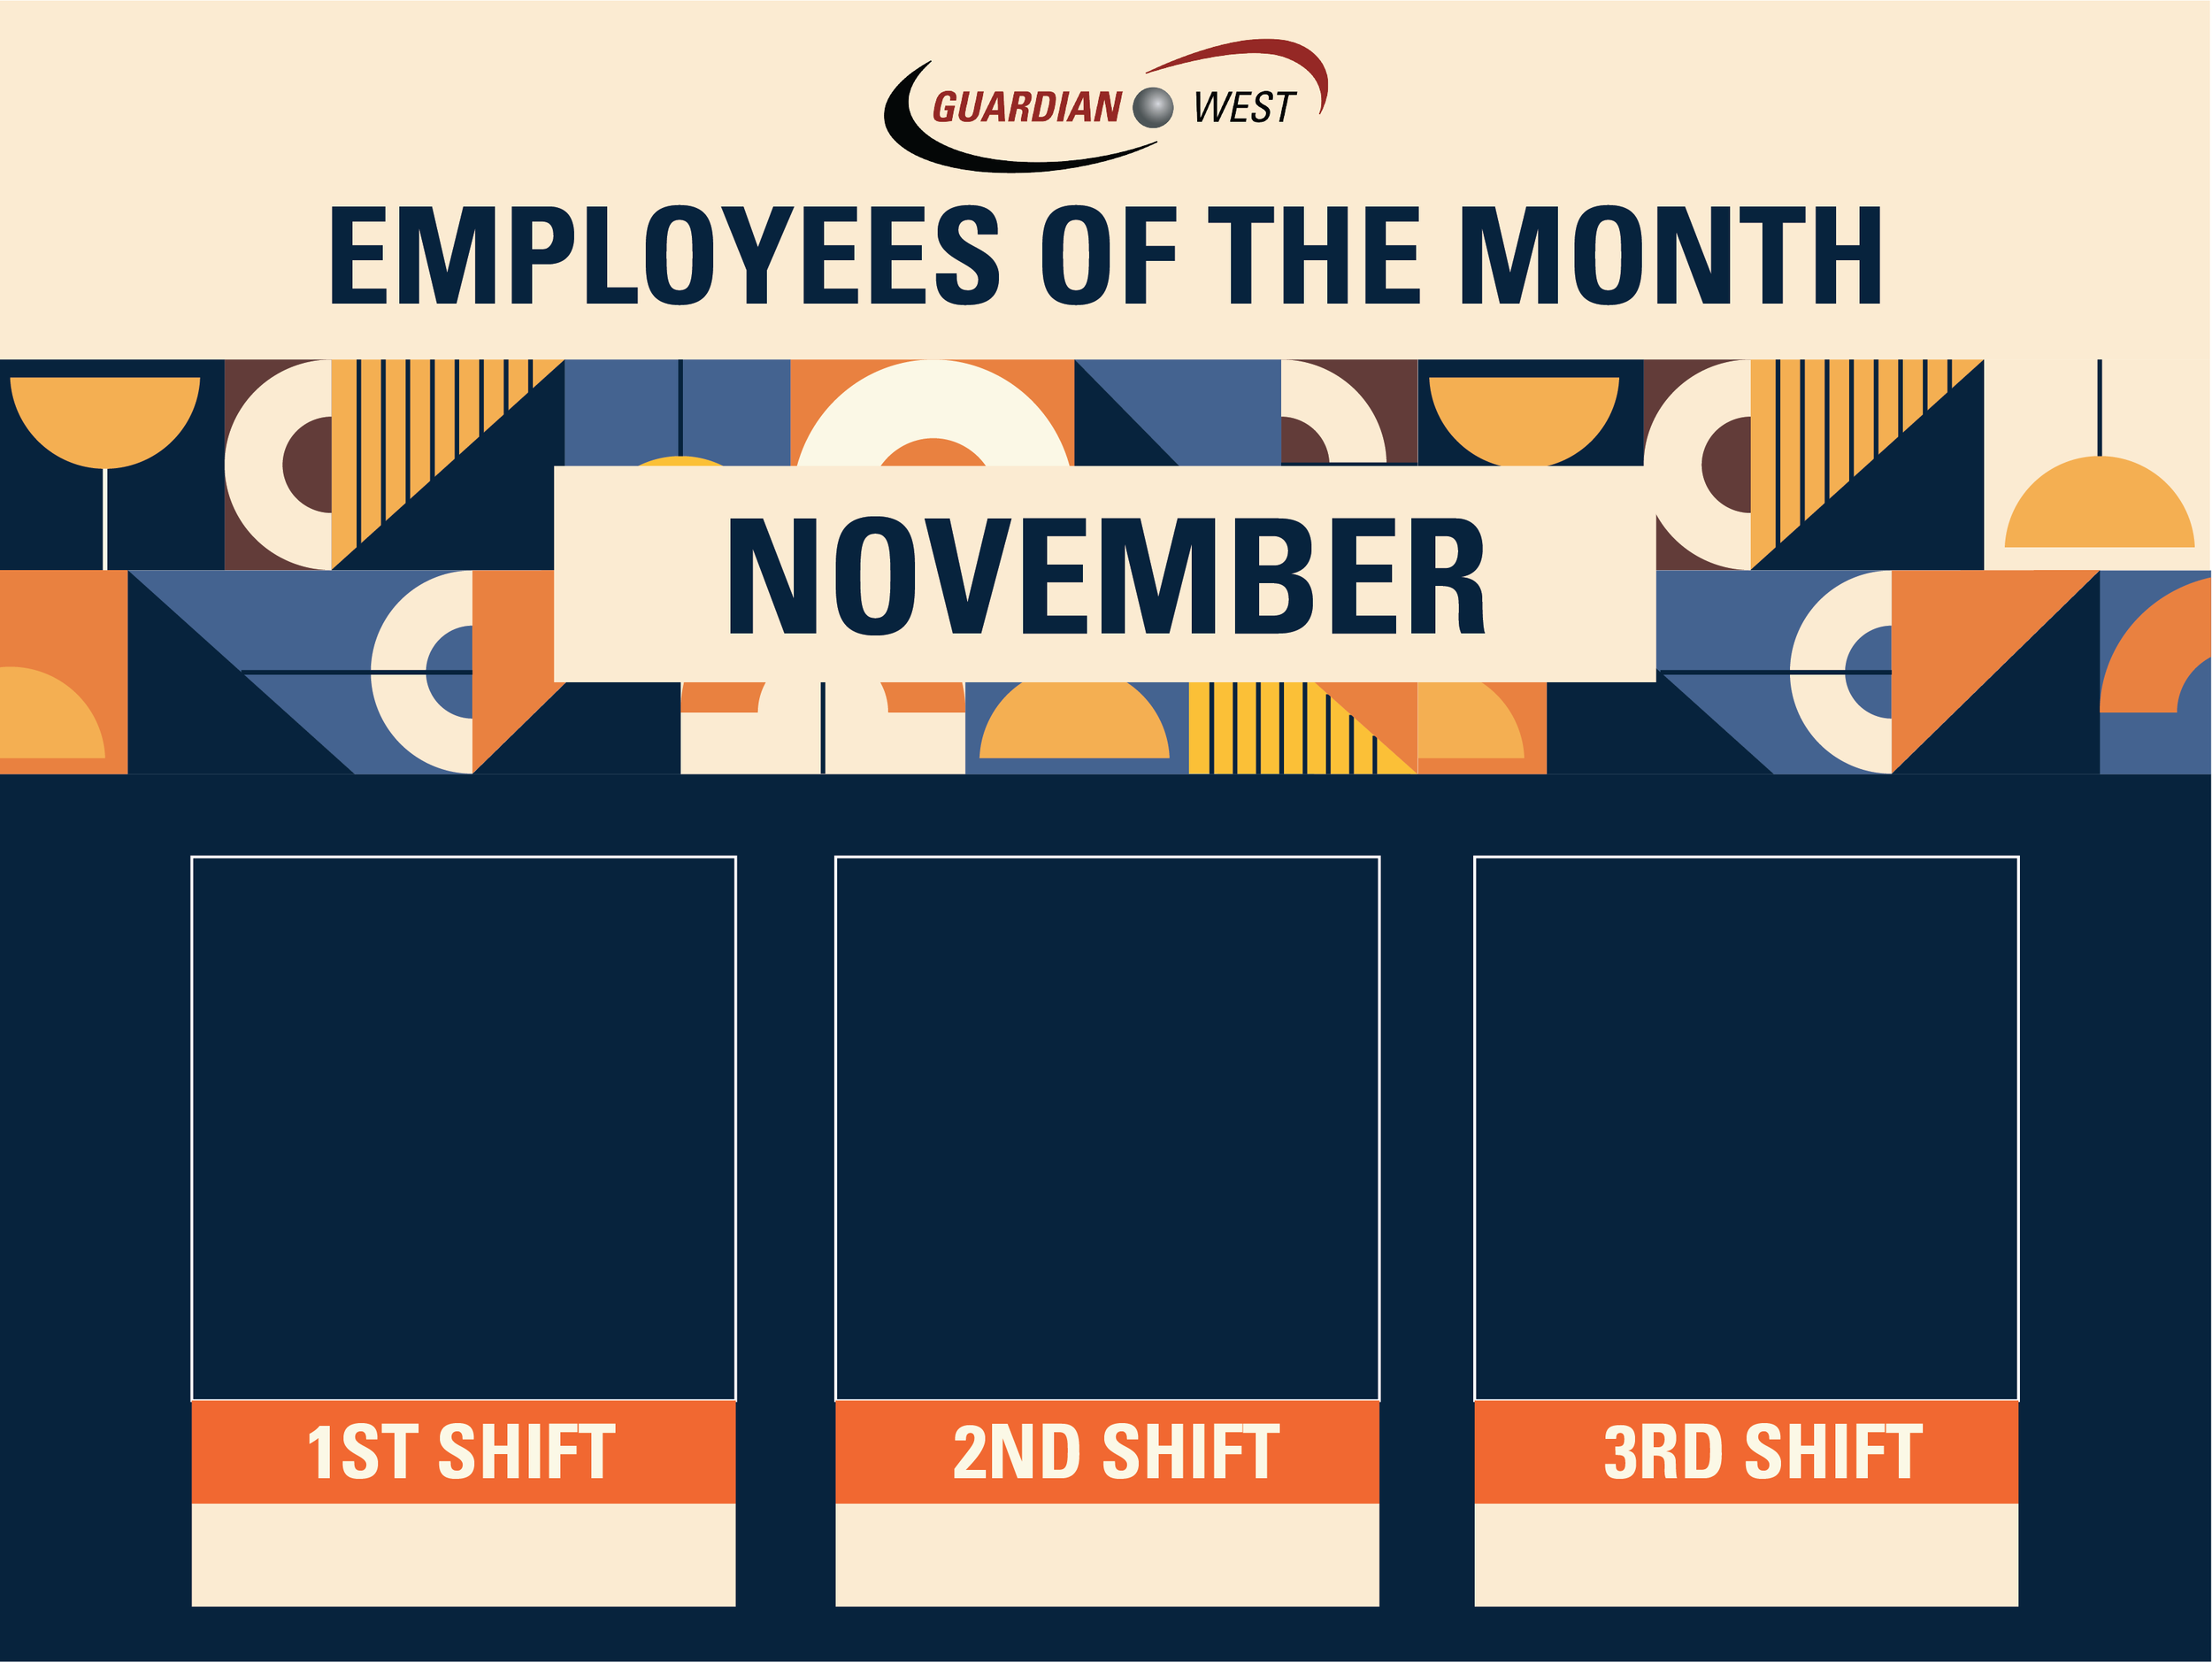 GW_Employee of the month2-11.png